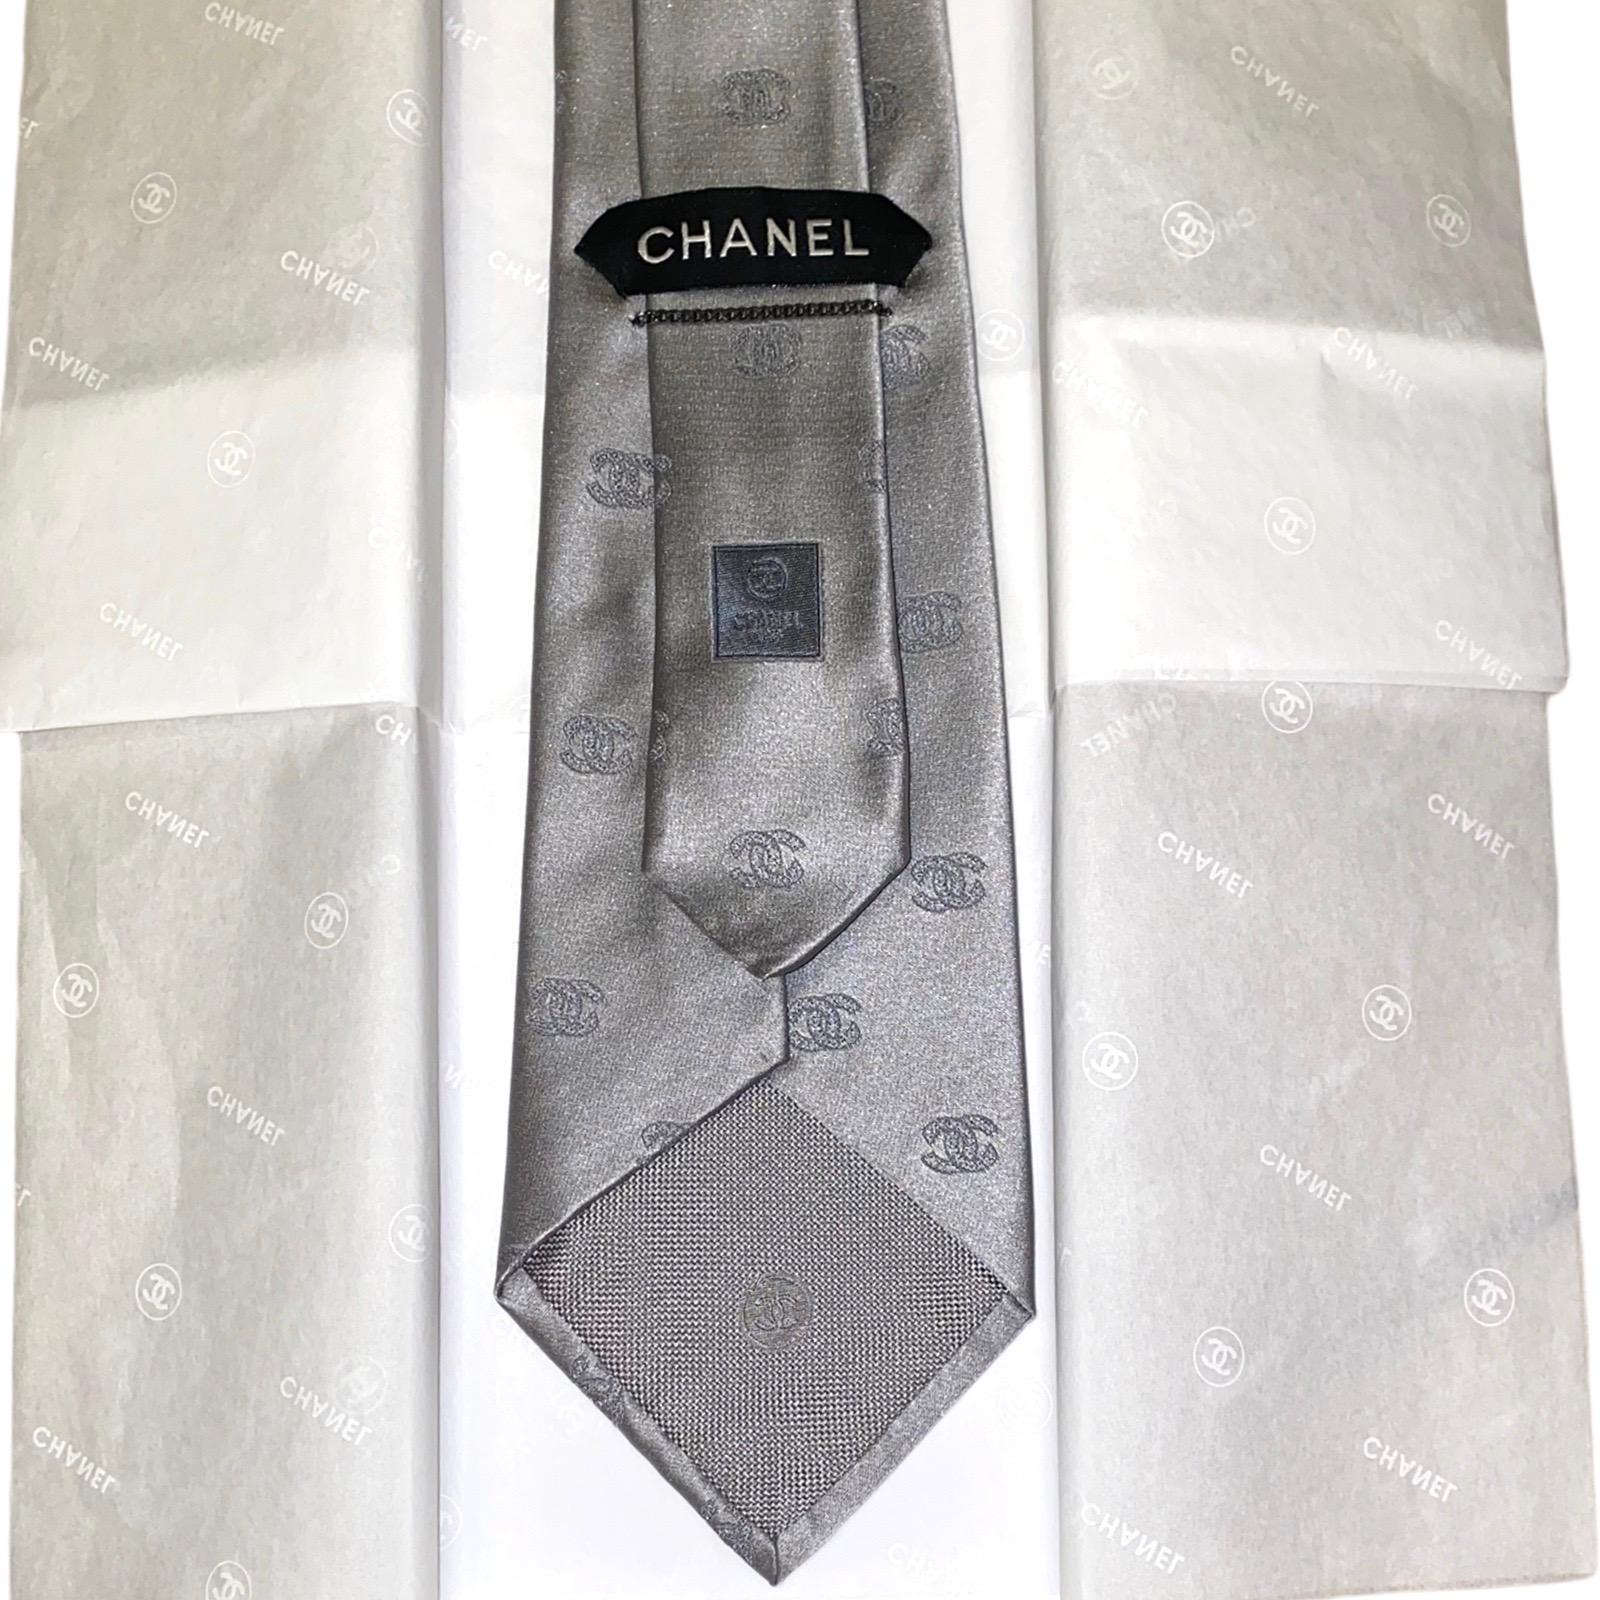 Beautiful CHANEL silk tie
A true signature item that will last you for many years
Chanel's famous CC logo motif all over
Chain on back
100% Silk
Handmade in Italy
Brandnew, never worn
Comes in original CHANEL tie box